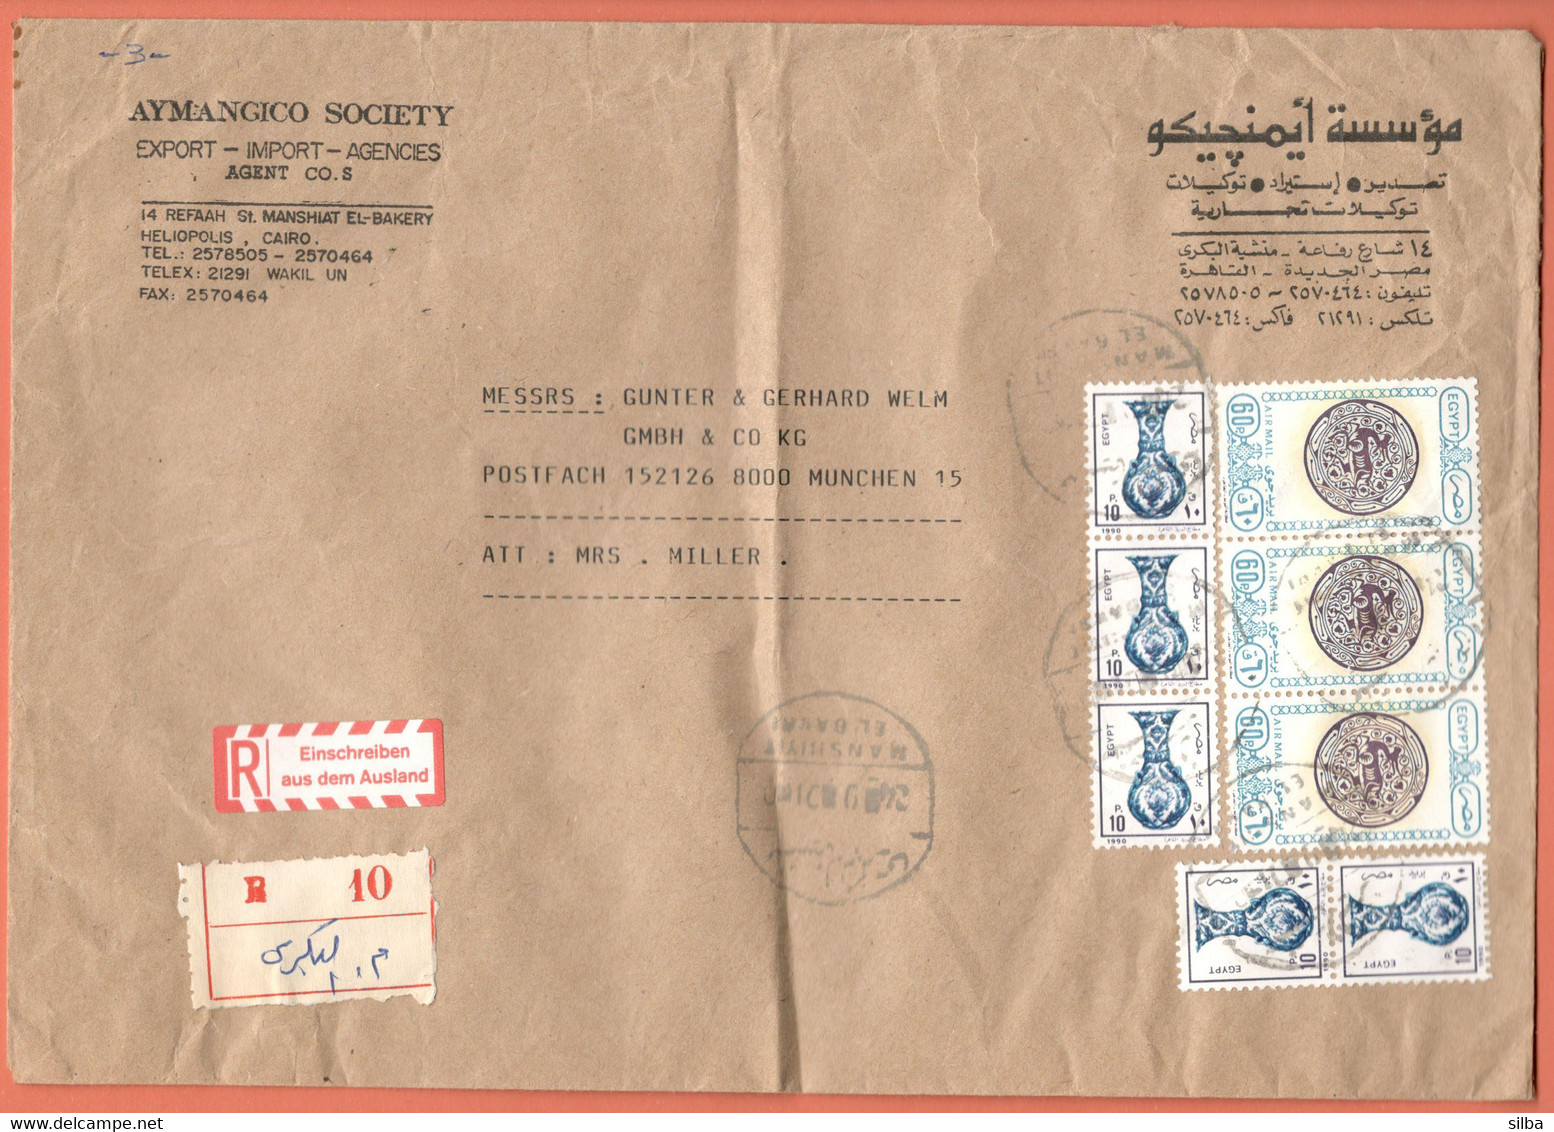 Egypt / Airmail - Art And Mosques, Dish With Gazelle Motif - 60 P, Vase 10 P, 1990 - Cartas & Documentos